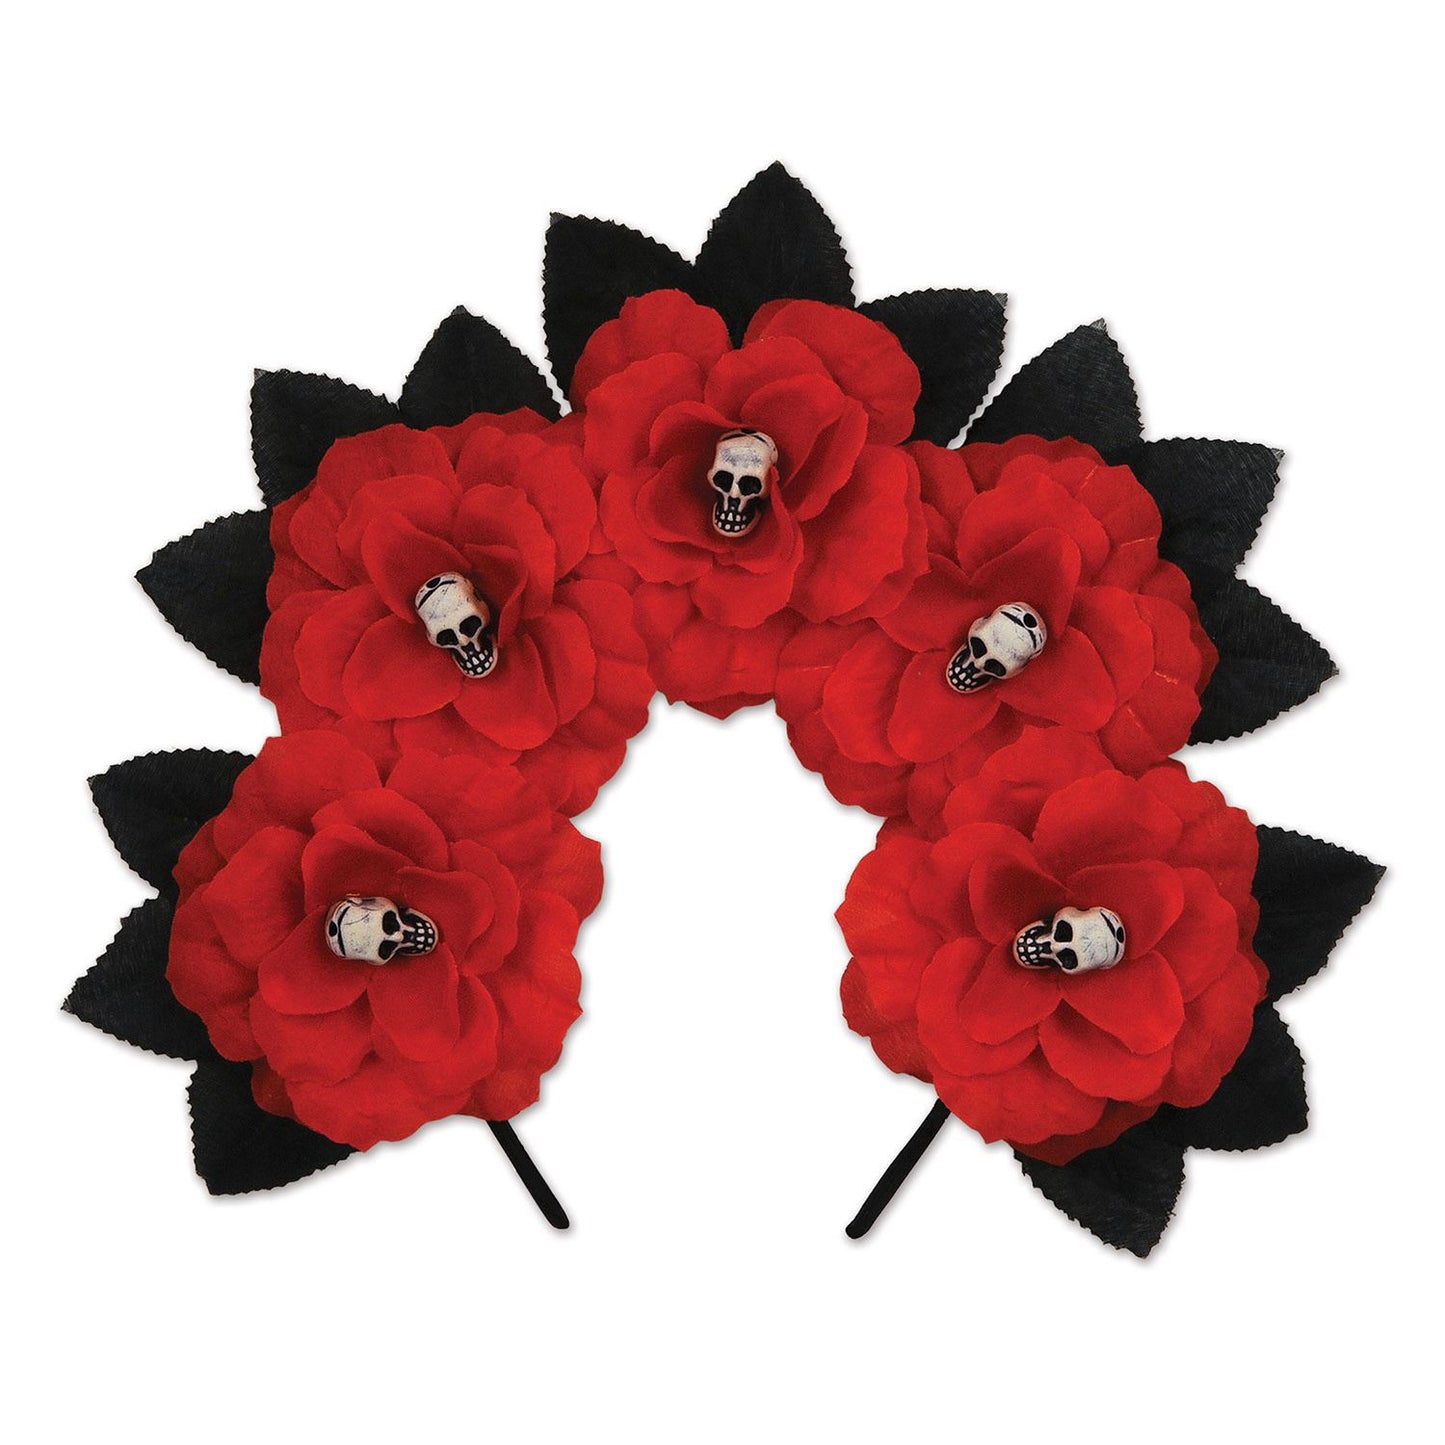 Beistle Day of the Dead Floral Headband  (1/Pkg) Party Supply Decoration : Day of the Dead